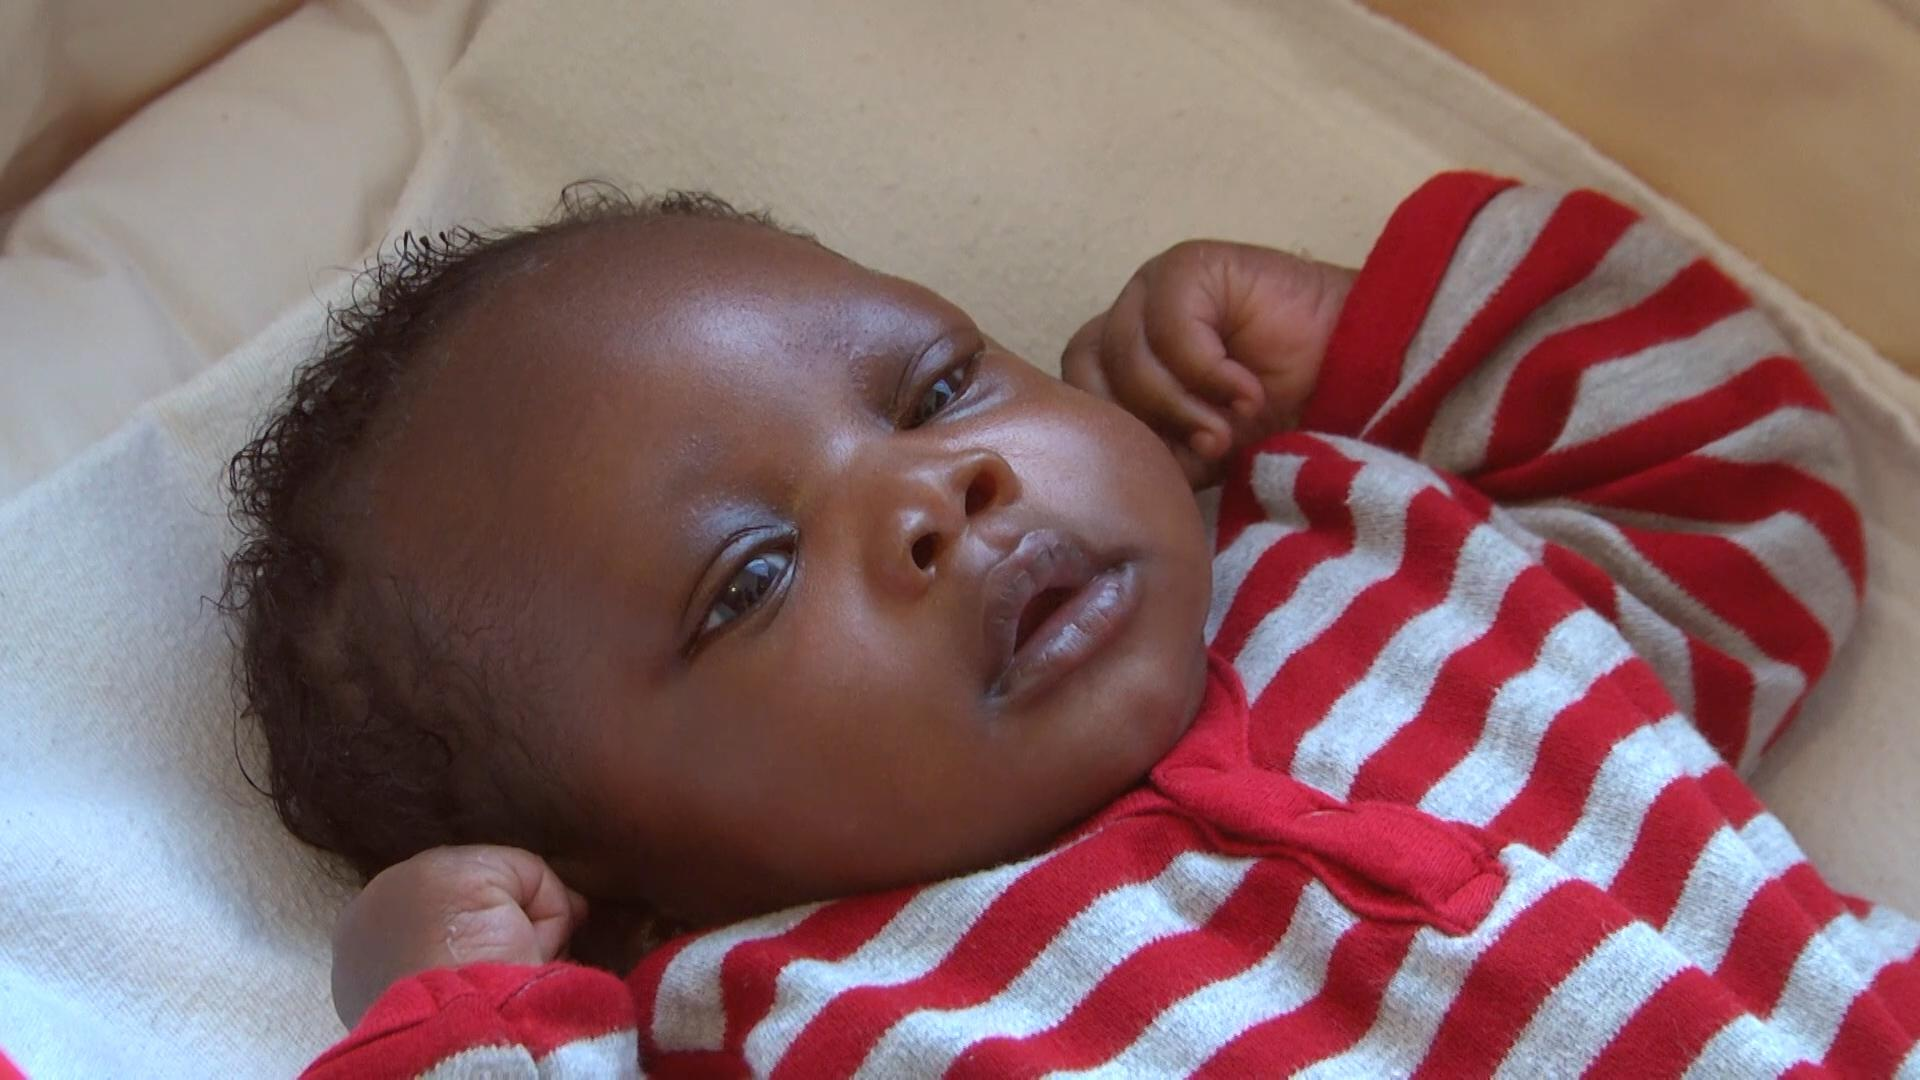 Baby Harry was abandoned in east London in 2017